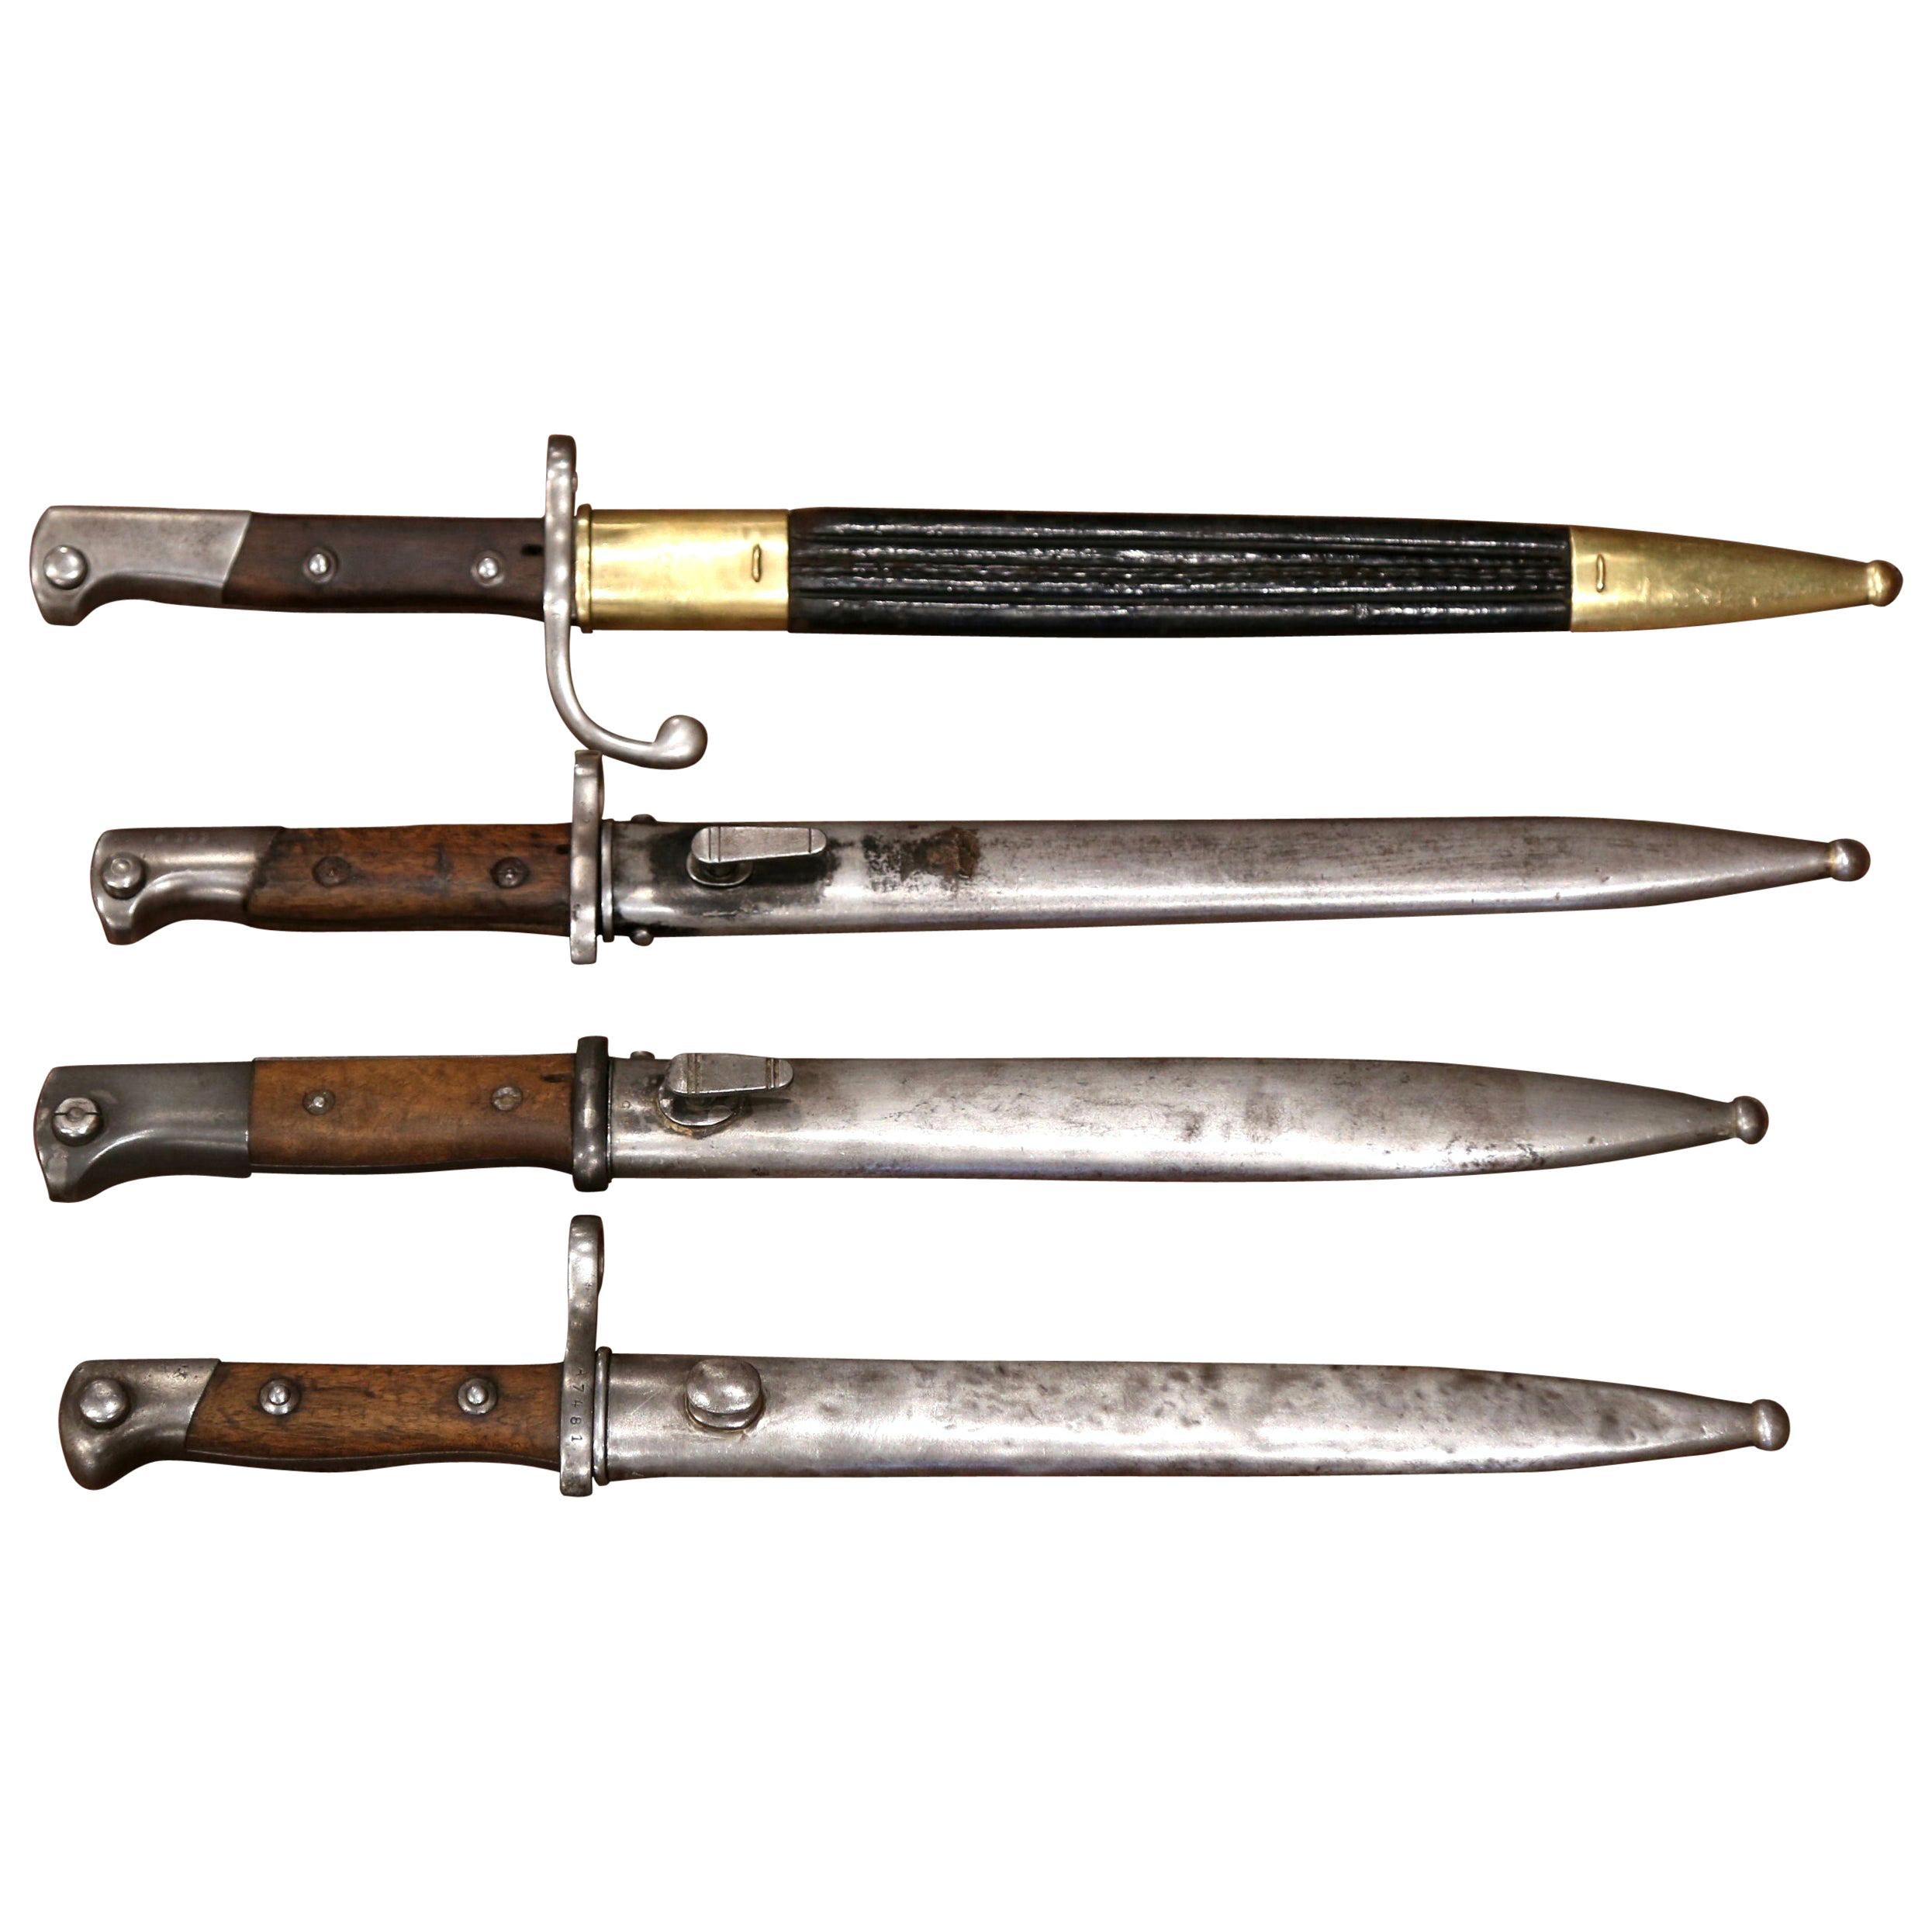 Set of Four 19th Century German Iron Bayonets and Sheaths with Wood Handles